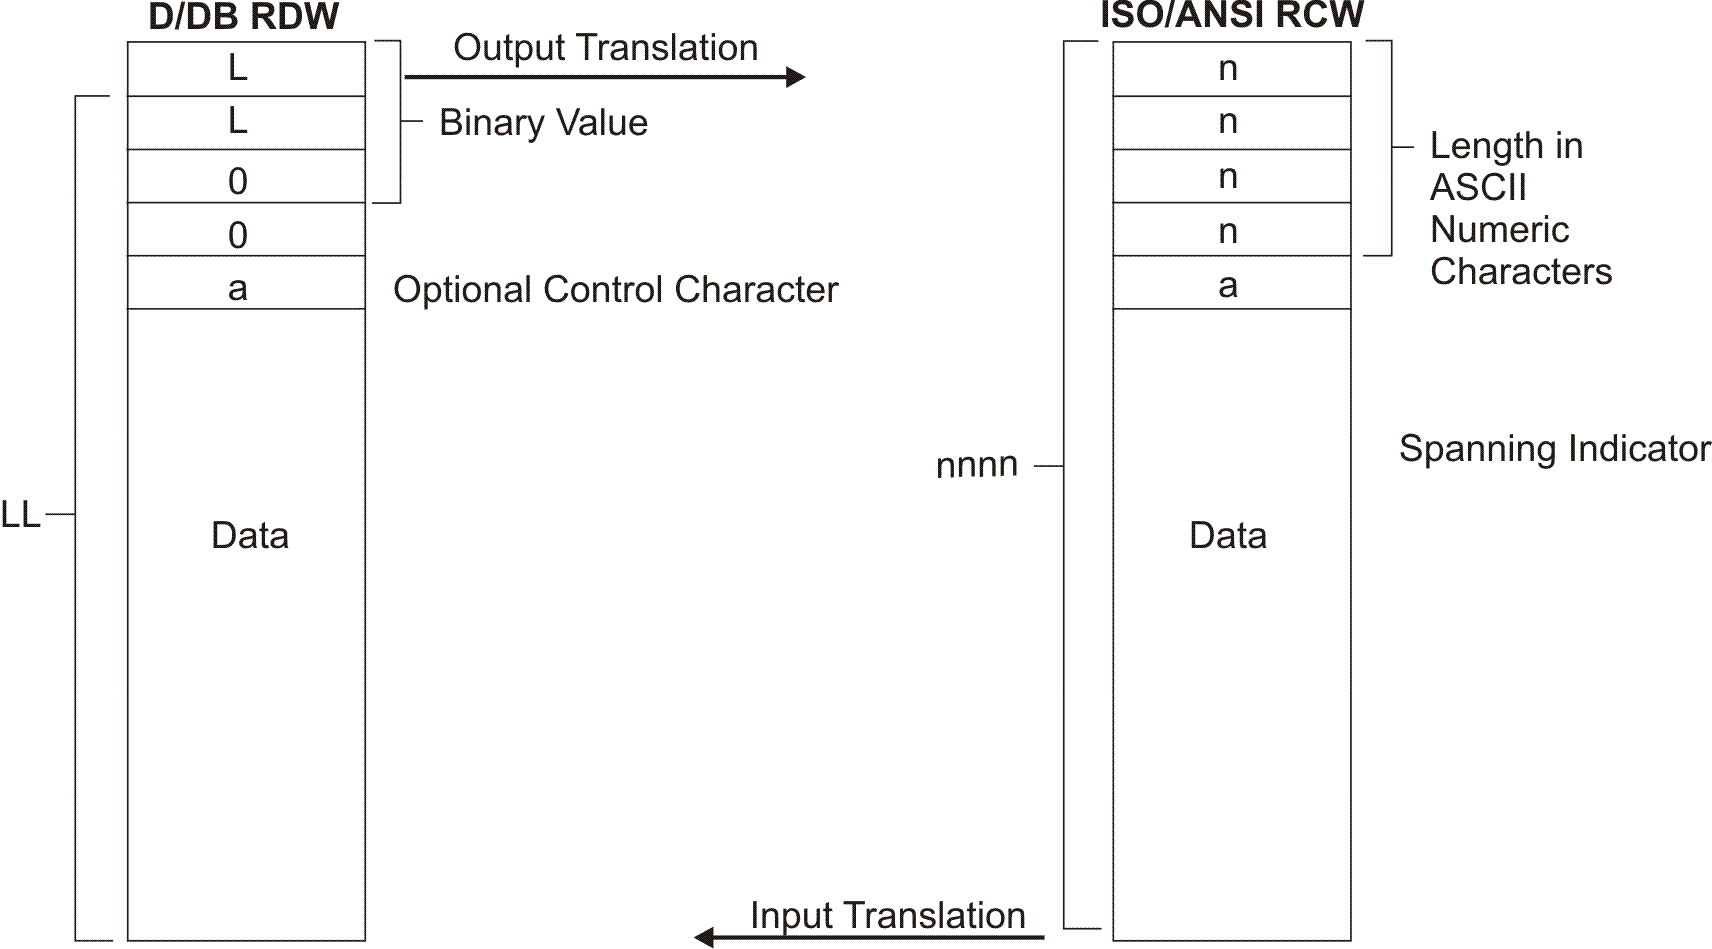 The ISO/ANSI RCW is 4 bytes long and expressed in ASCII characters. The D/DB RDW is expressed in binary.